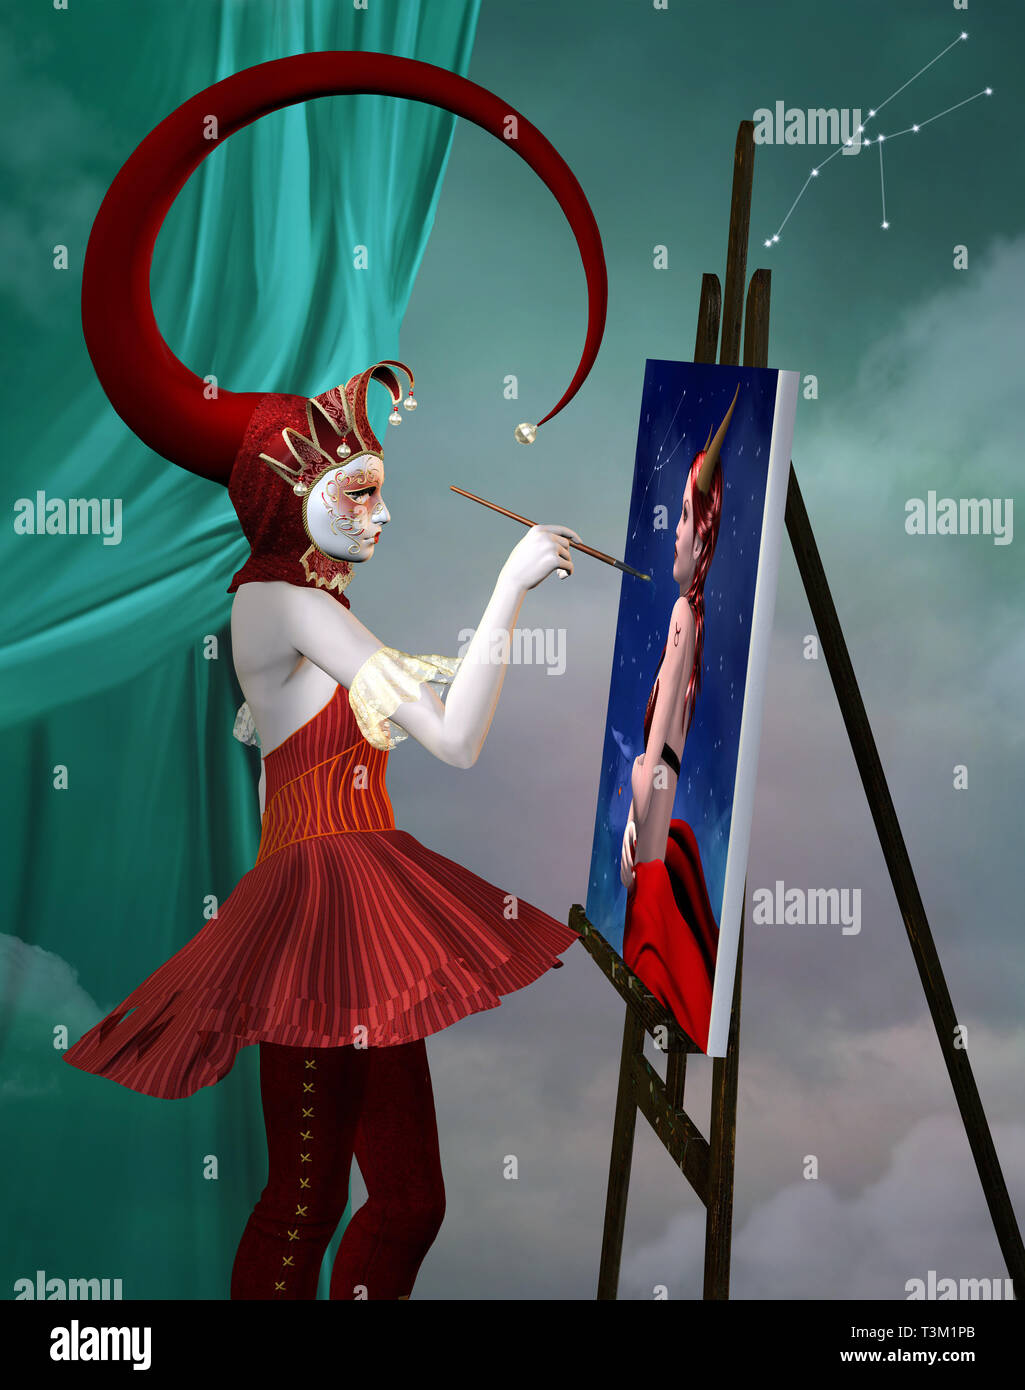 Zodiac series - Taurus astrological sign as a painting jester Stock Photo